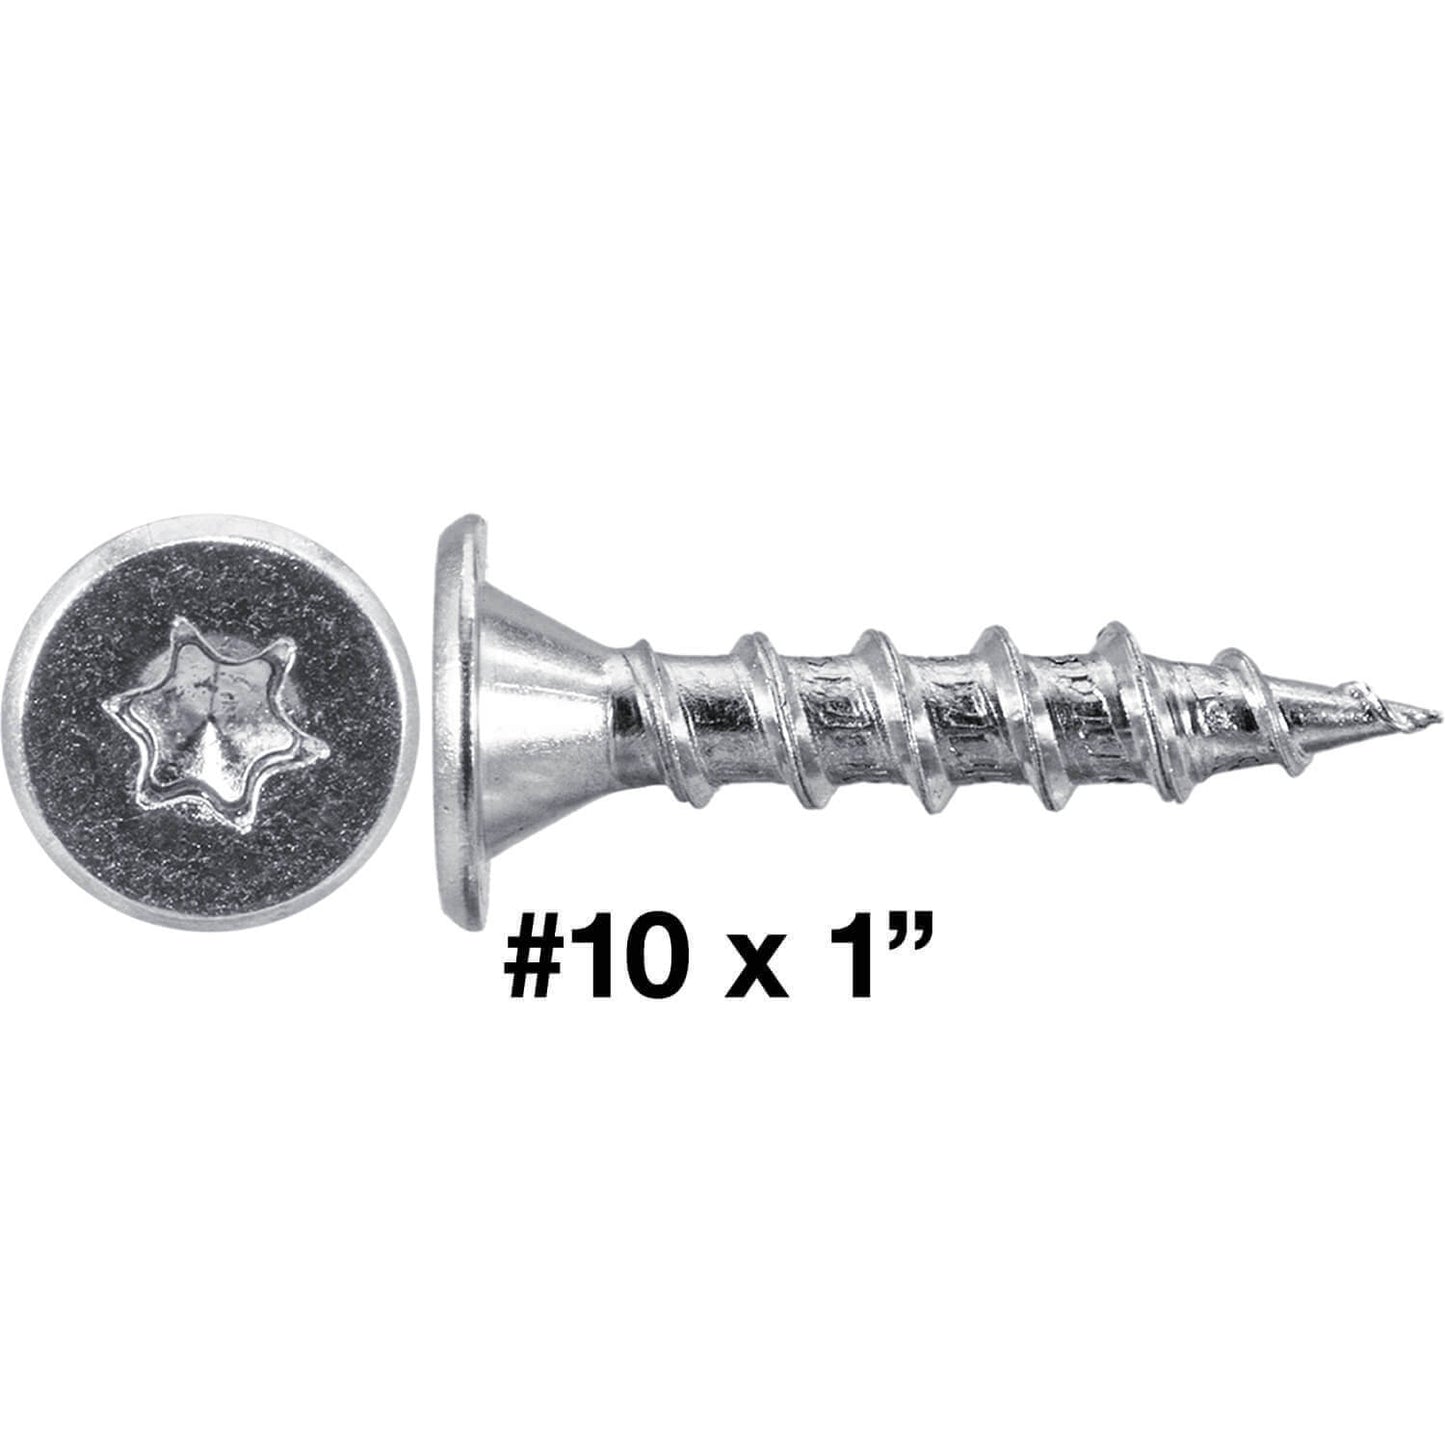 #10 Low Profile Pancake Head - Wood to Metal Roofing Screws for Standing Seam Roofs - Zinc Plated (Qty 250)